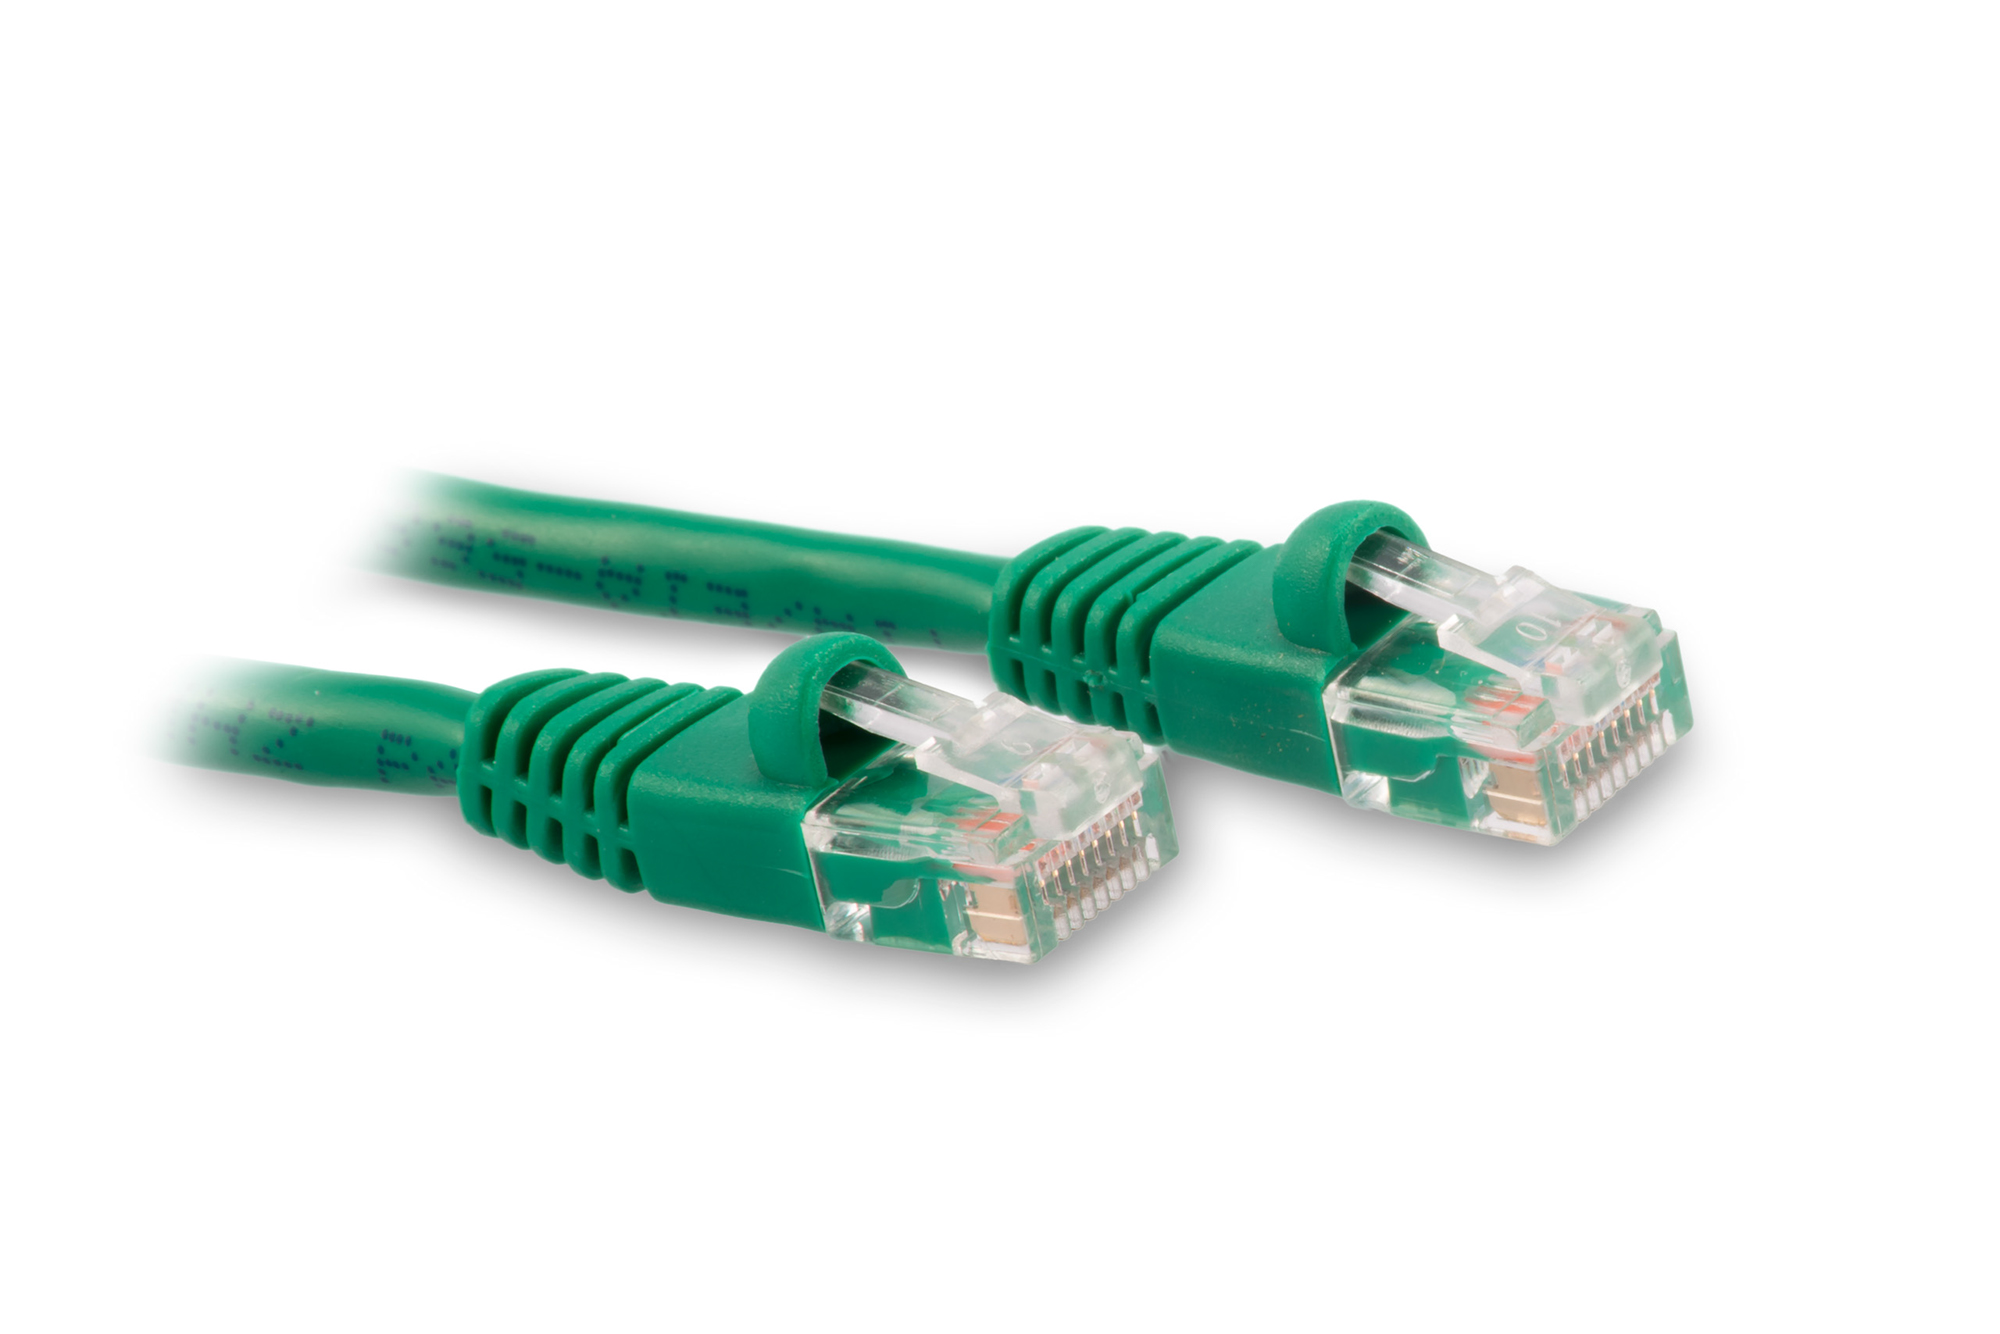 6FT Cat6 Ethernet Patch Cable - Green Color - Snagless Boot